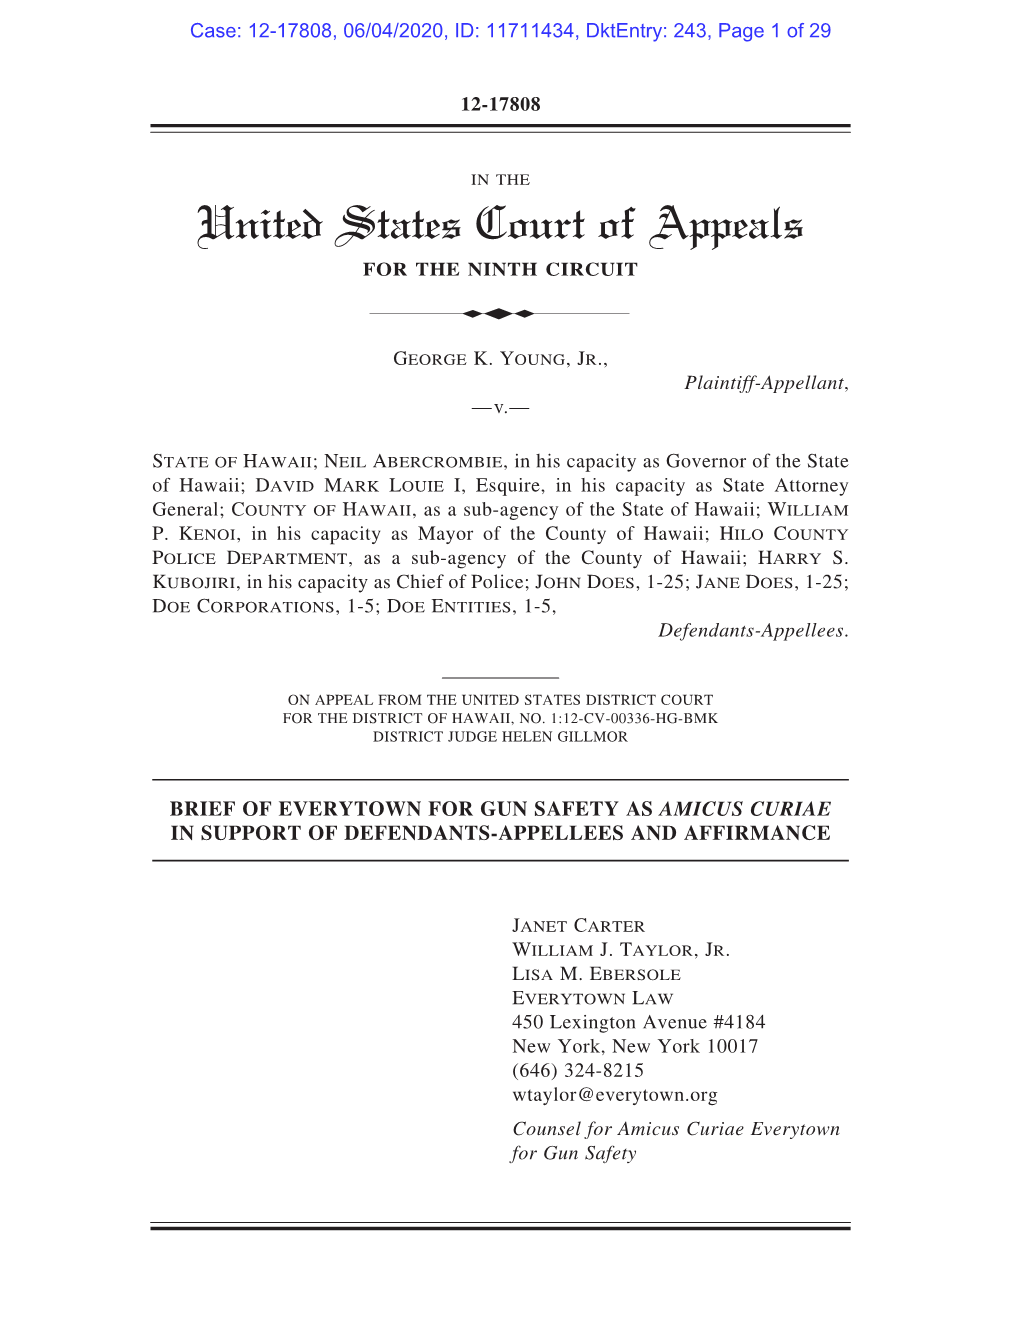 June 4, 2020 – Everytown's Amicus Brief in Support of Defendants